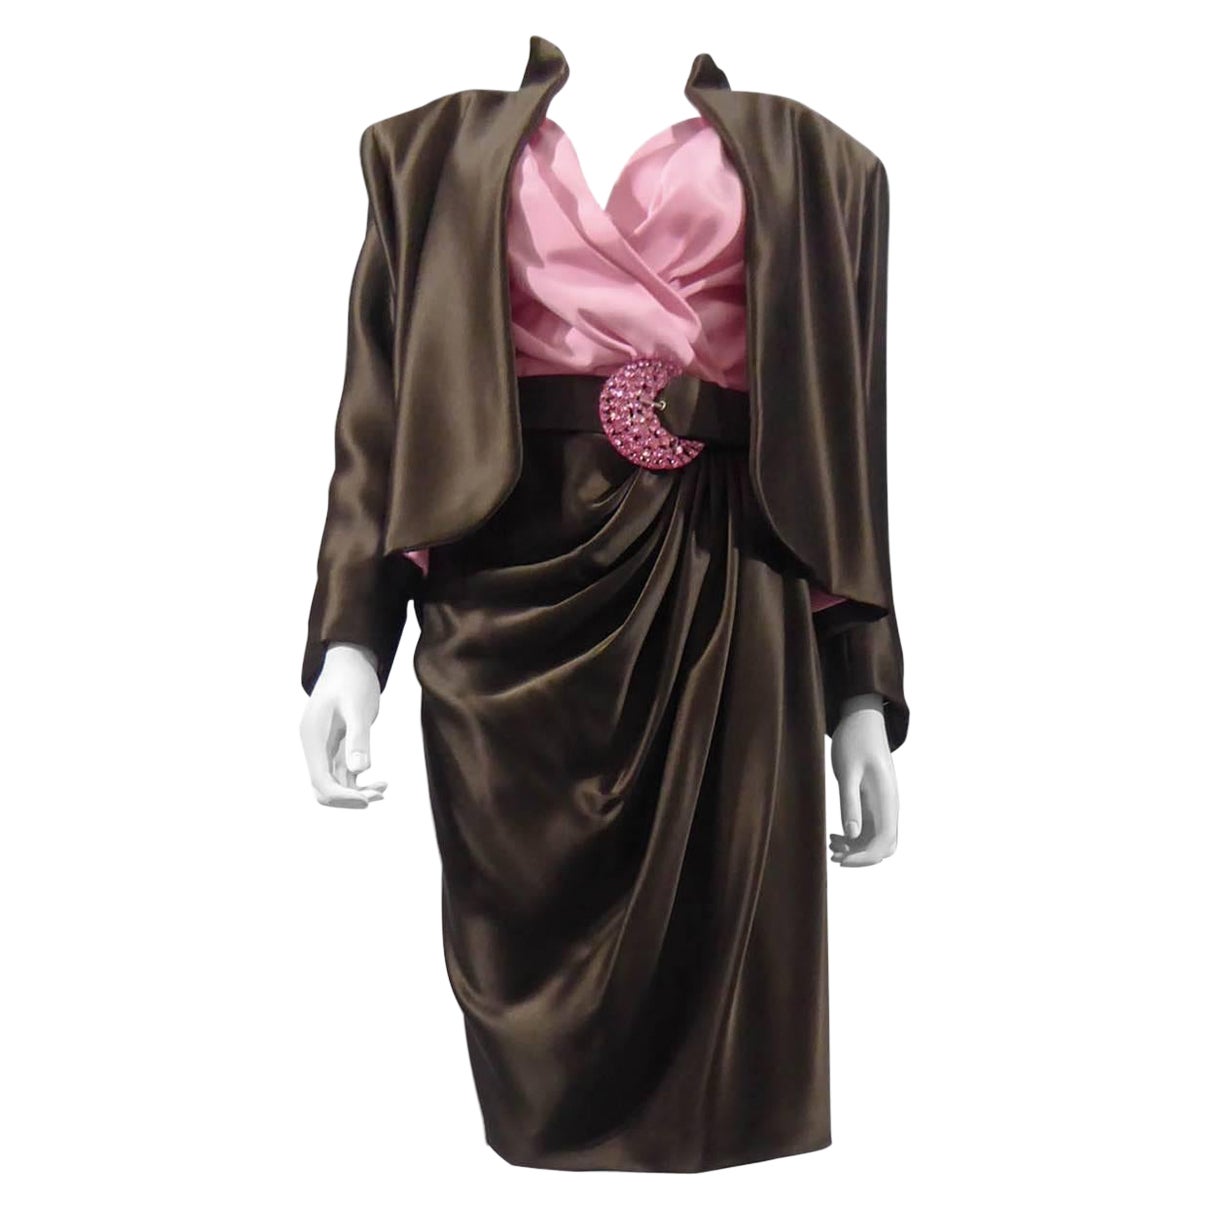 An Yves Saint Laurent Couture Evening Set Numbered 65123, Circa 1989